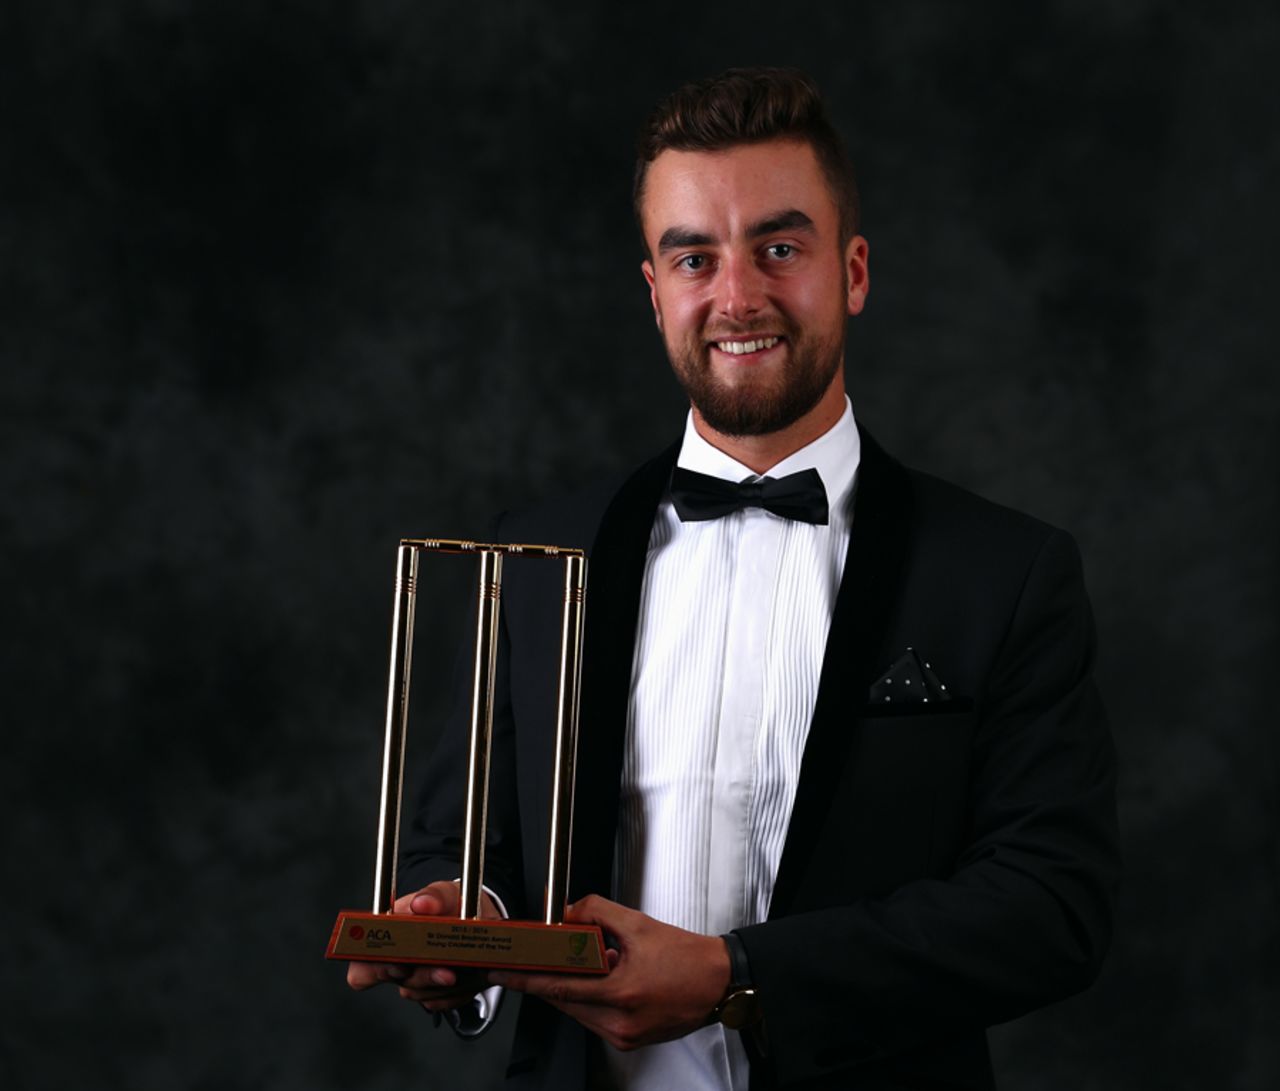 South Australia batsman Alex Ross was named the Bradman Young Cricketer of the Year, Melbourne, January 27, 2016